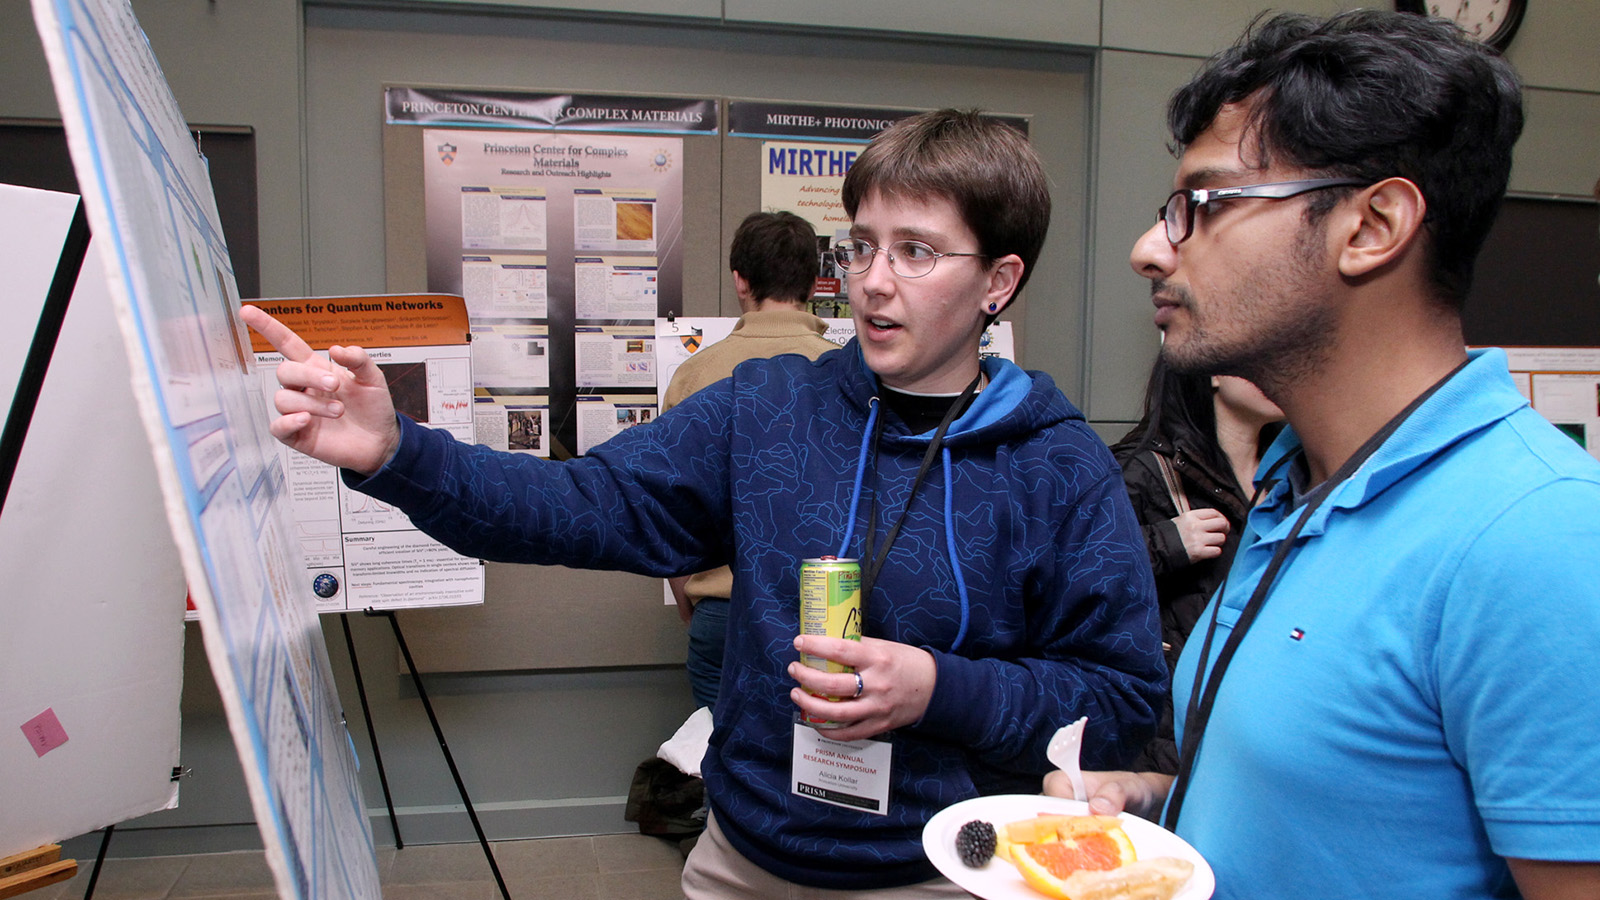 Researchers discuss recent work during 